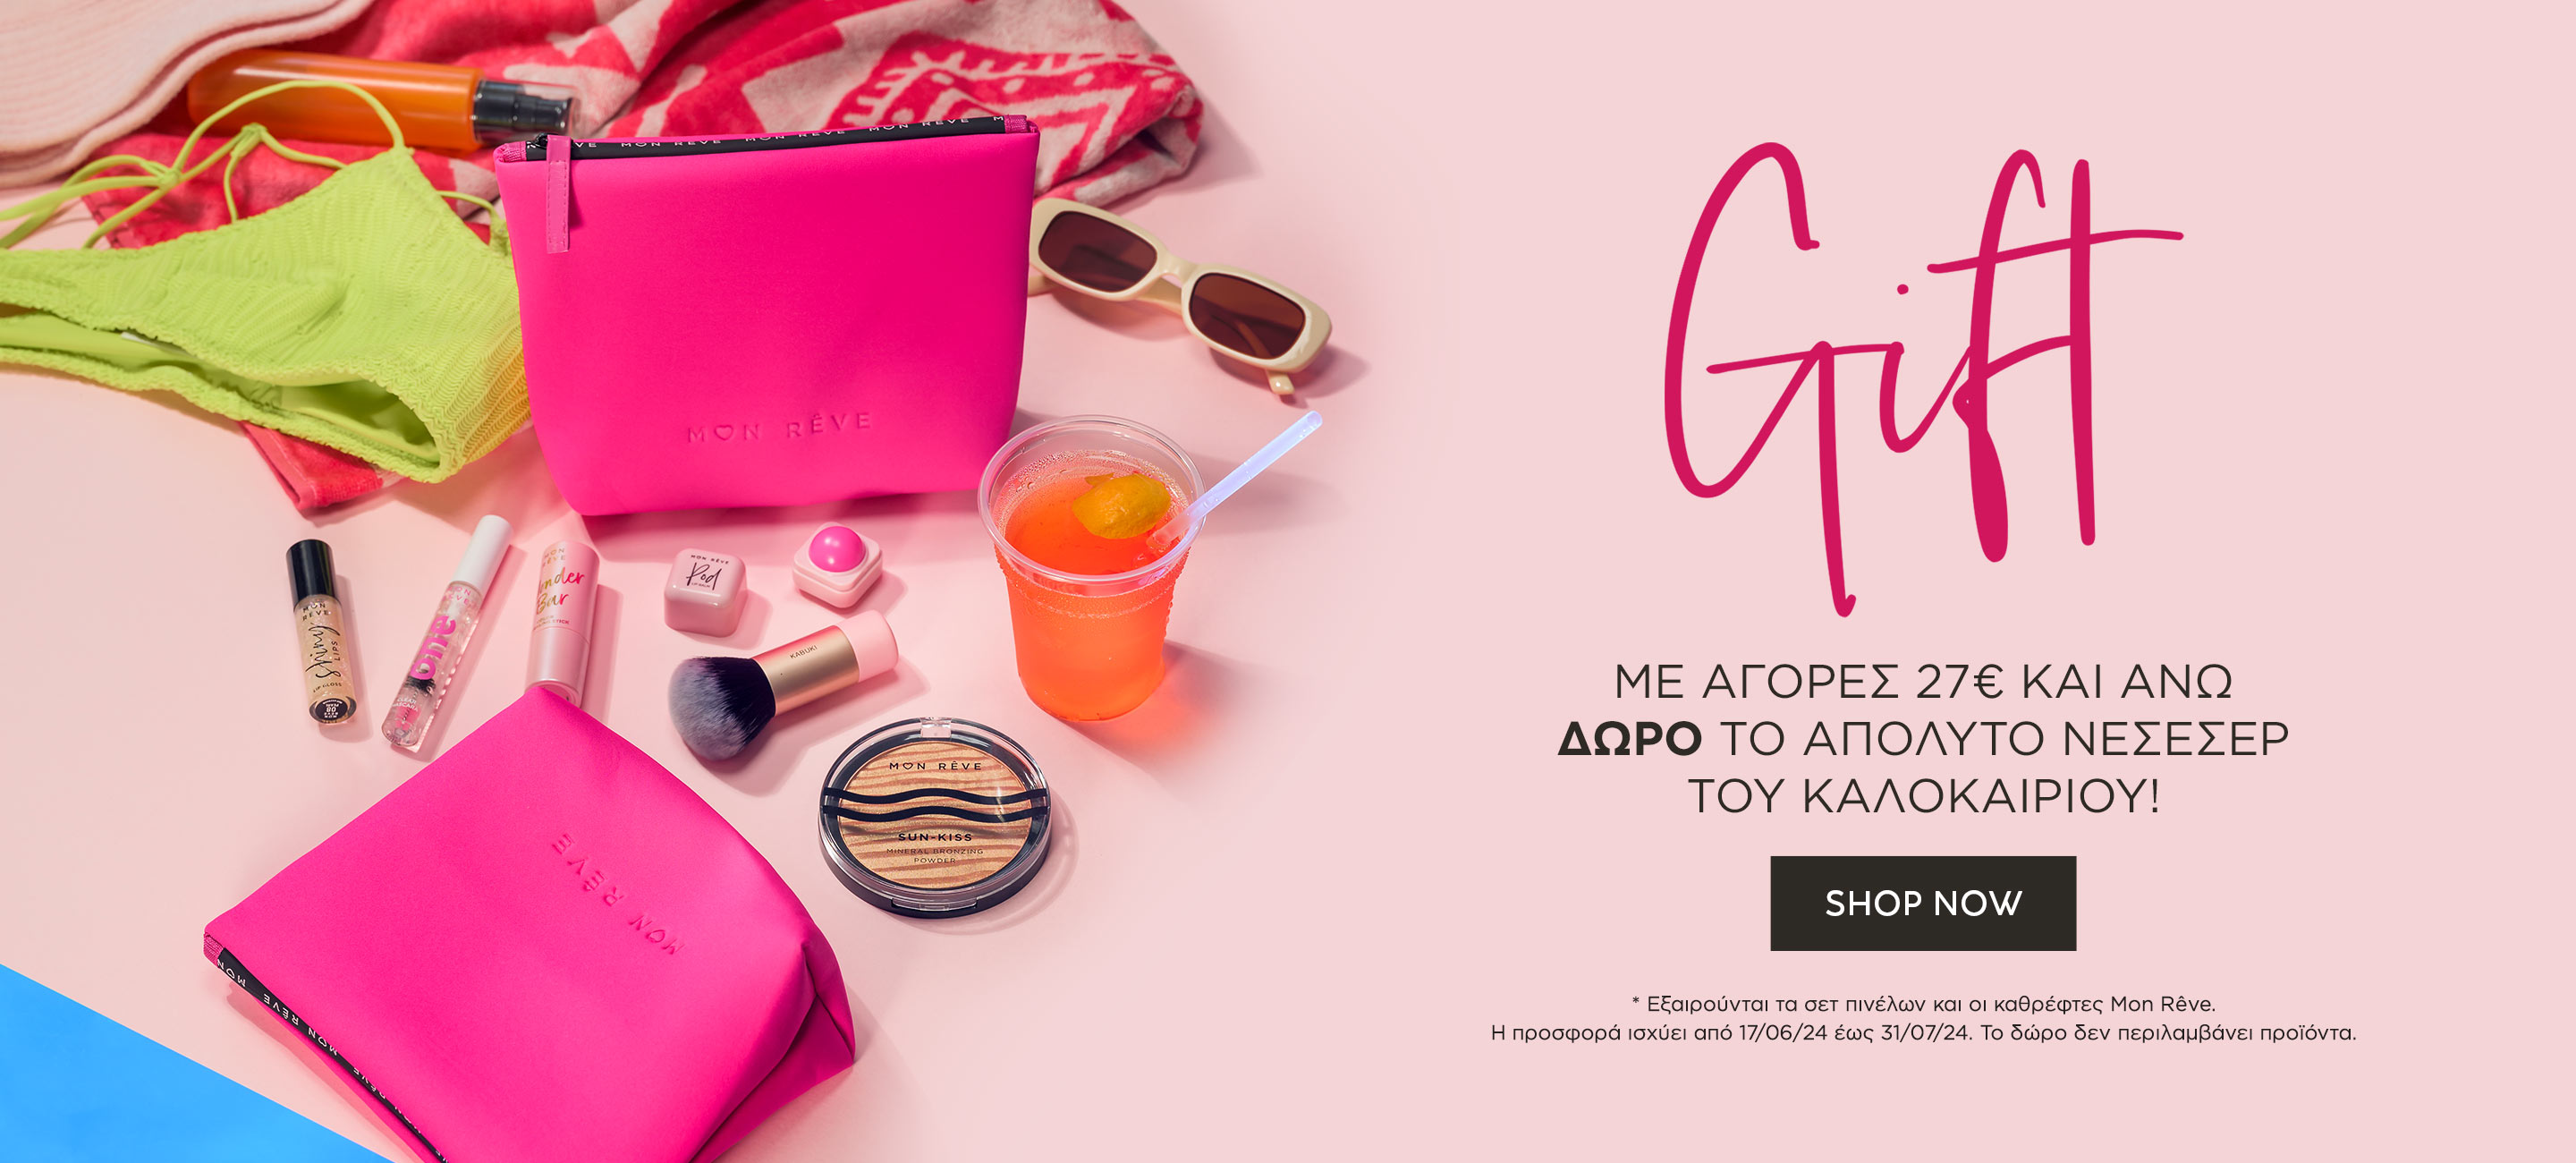 Homepage banner with a promotional product in Greek